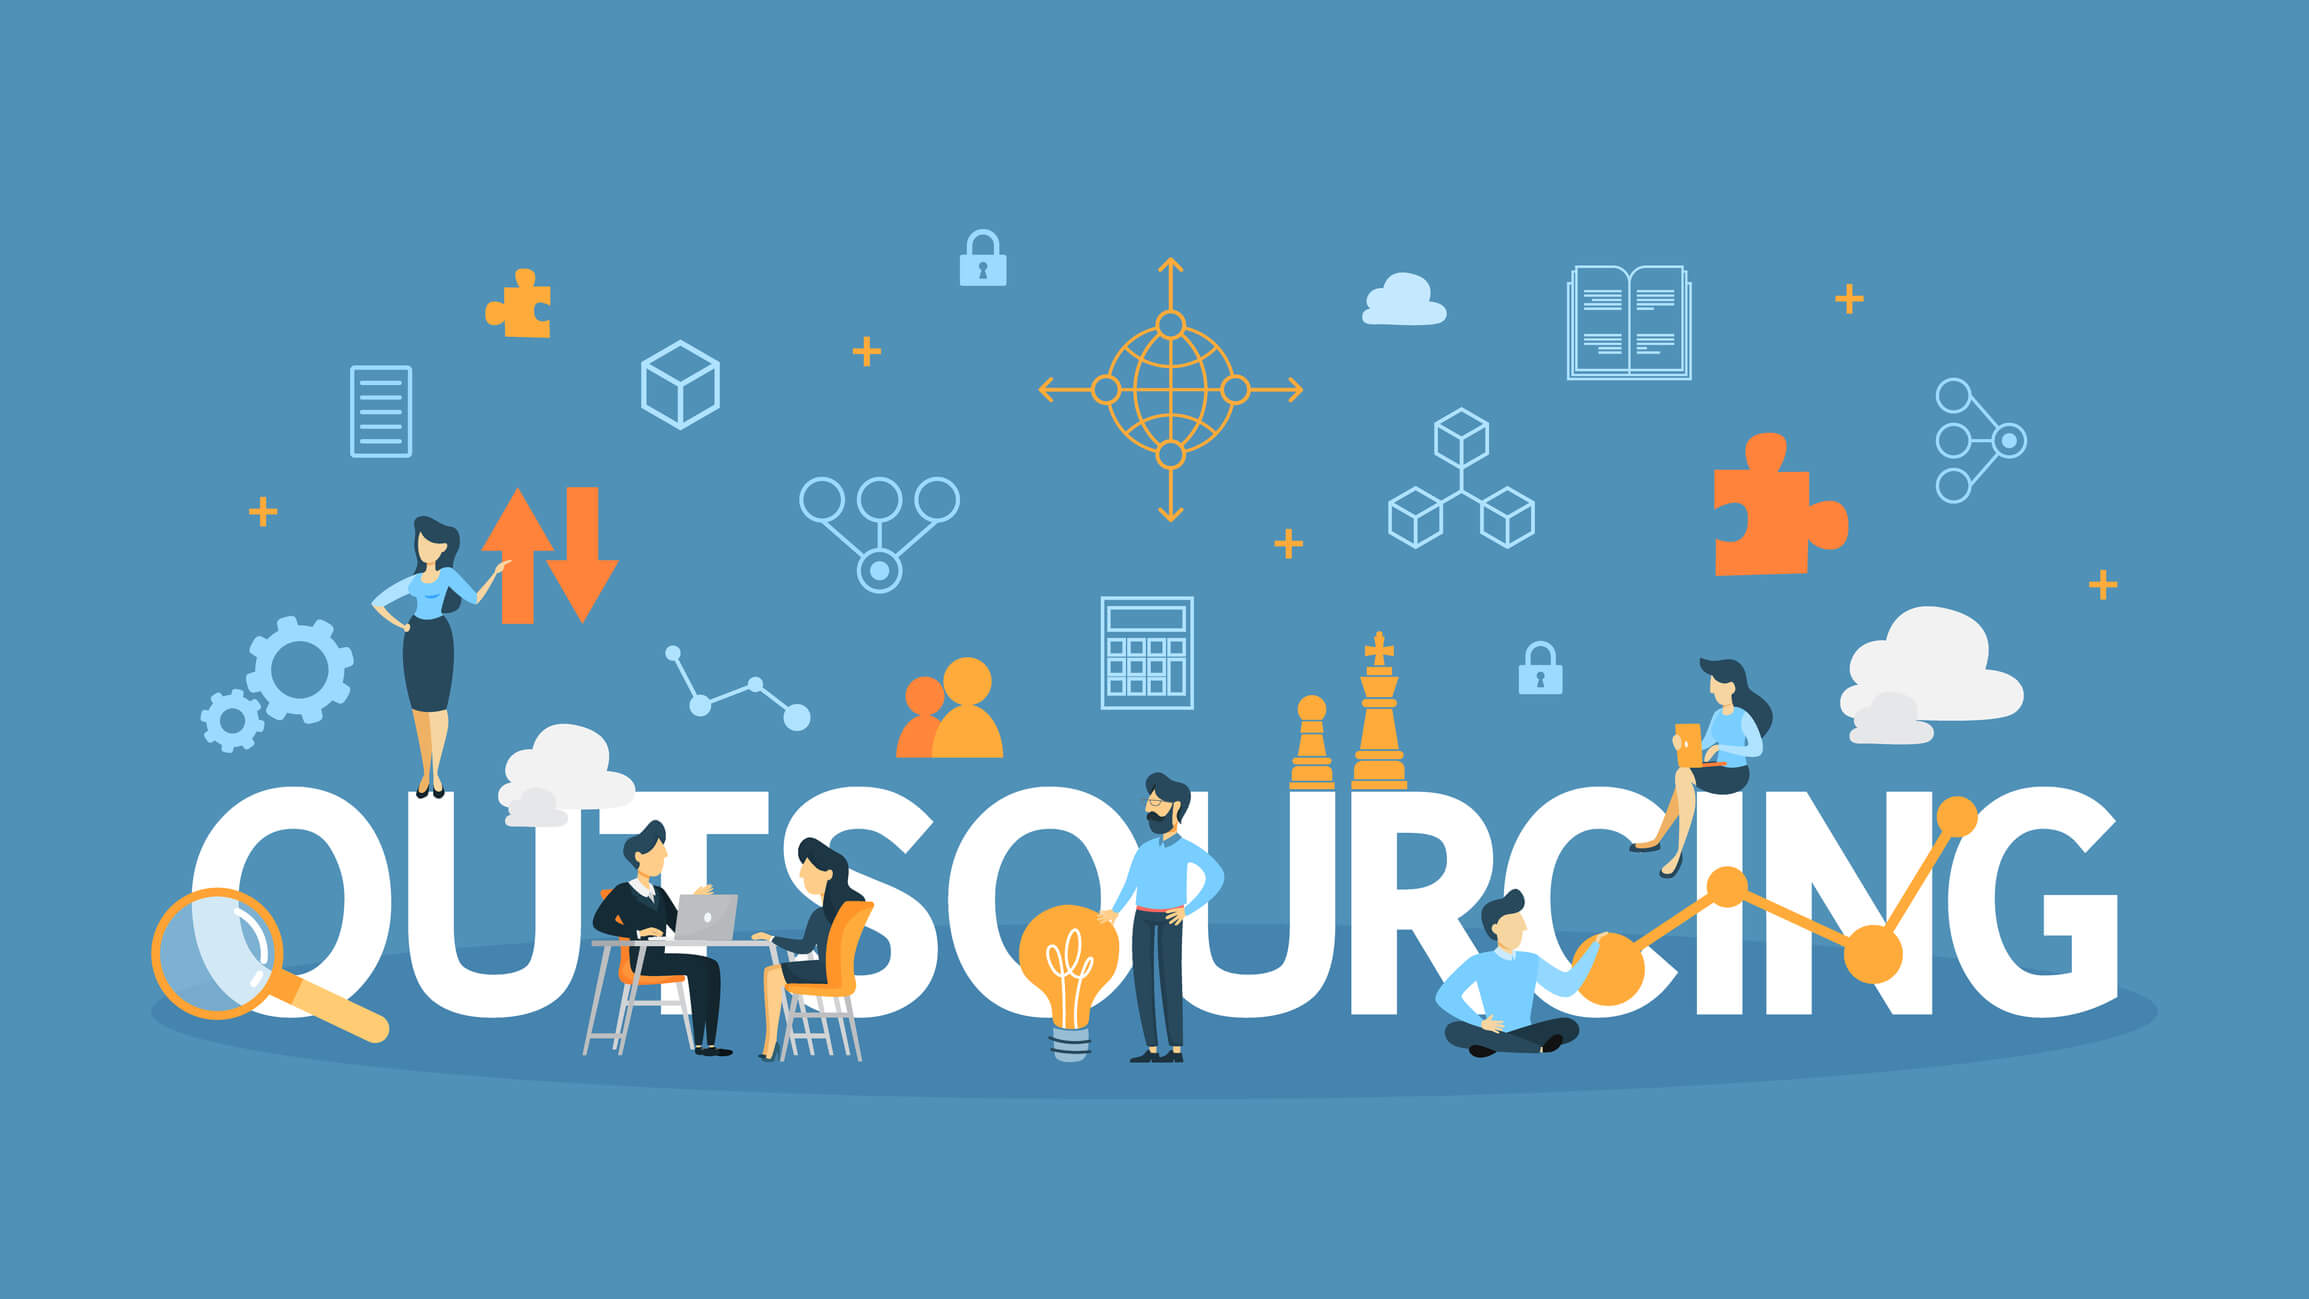 What you Should do before you Search for a Outsourcing Development Company  in Ukraine